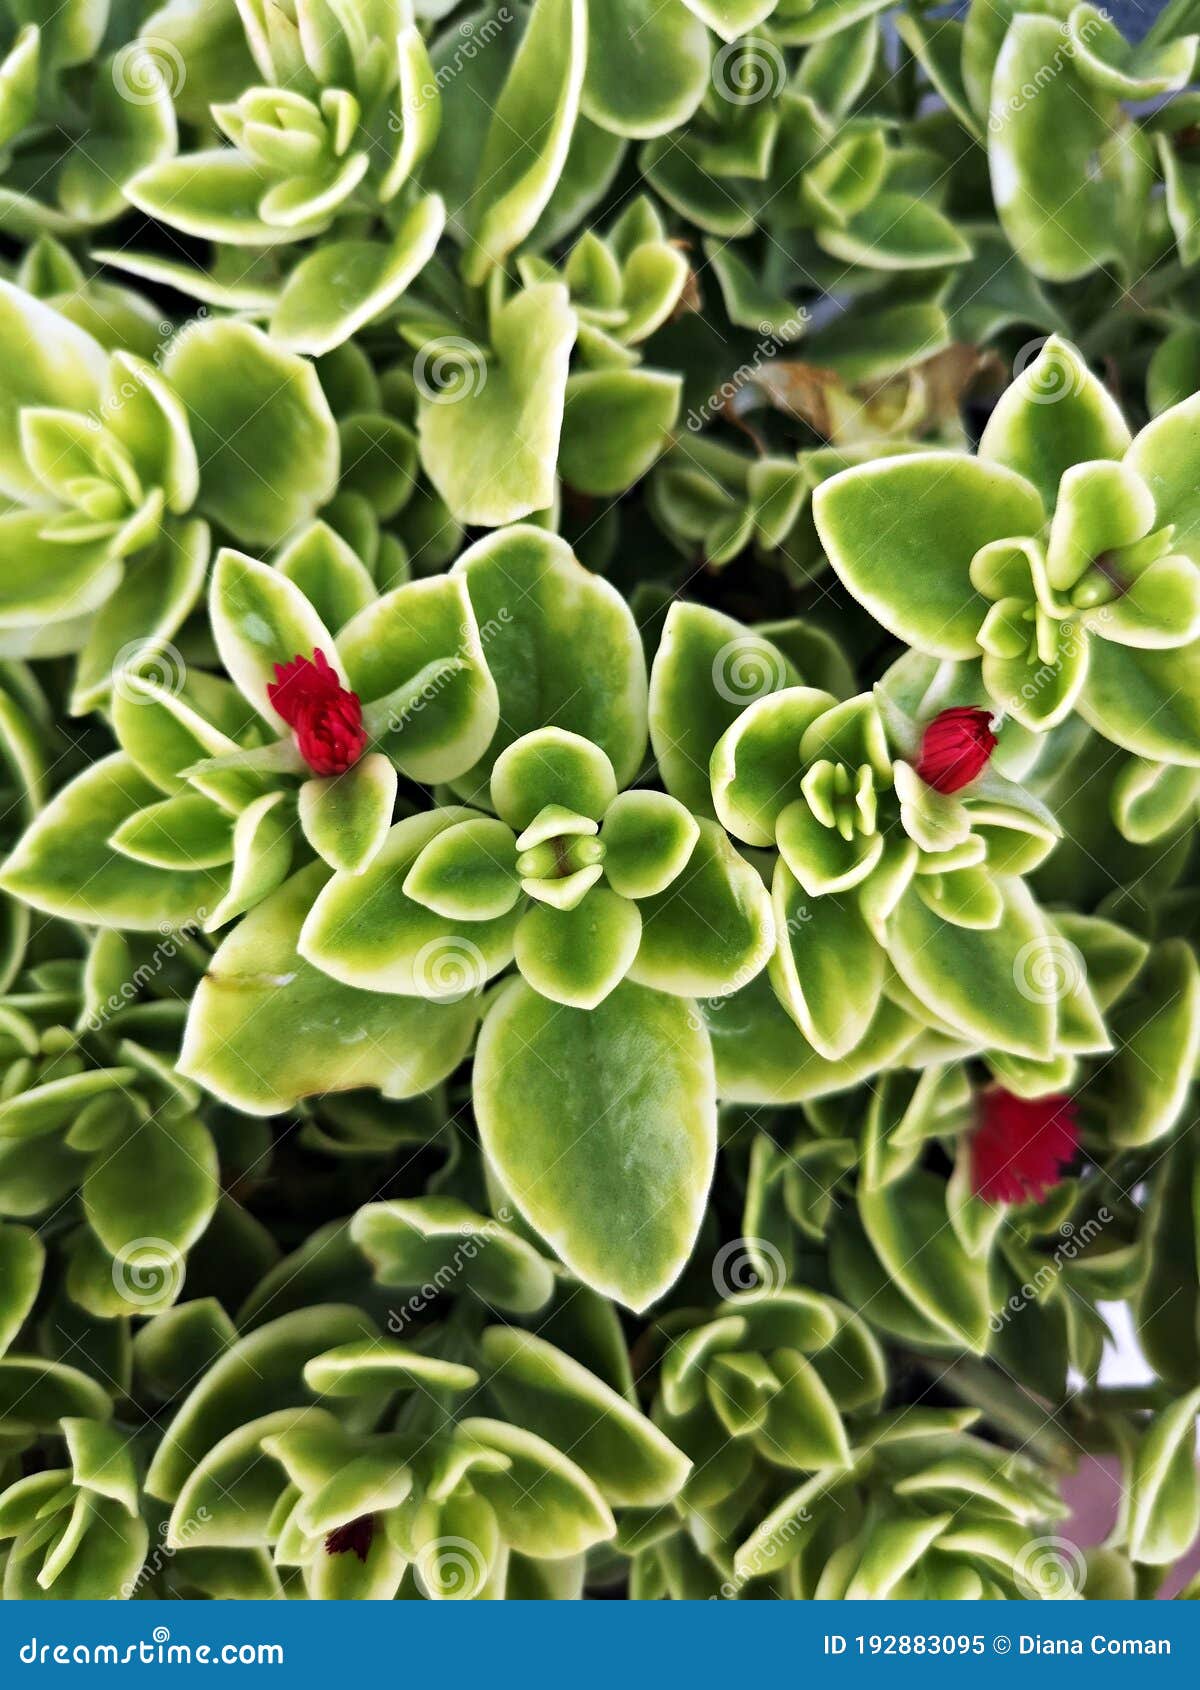 heartleaf iceplant with red flowers